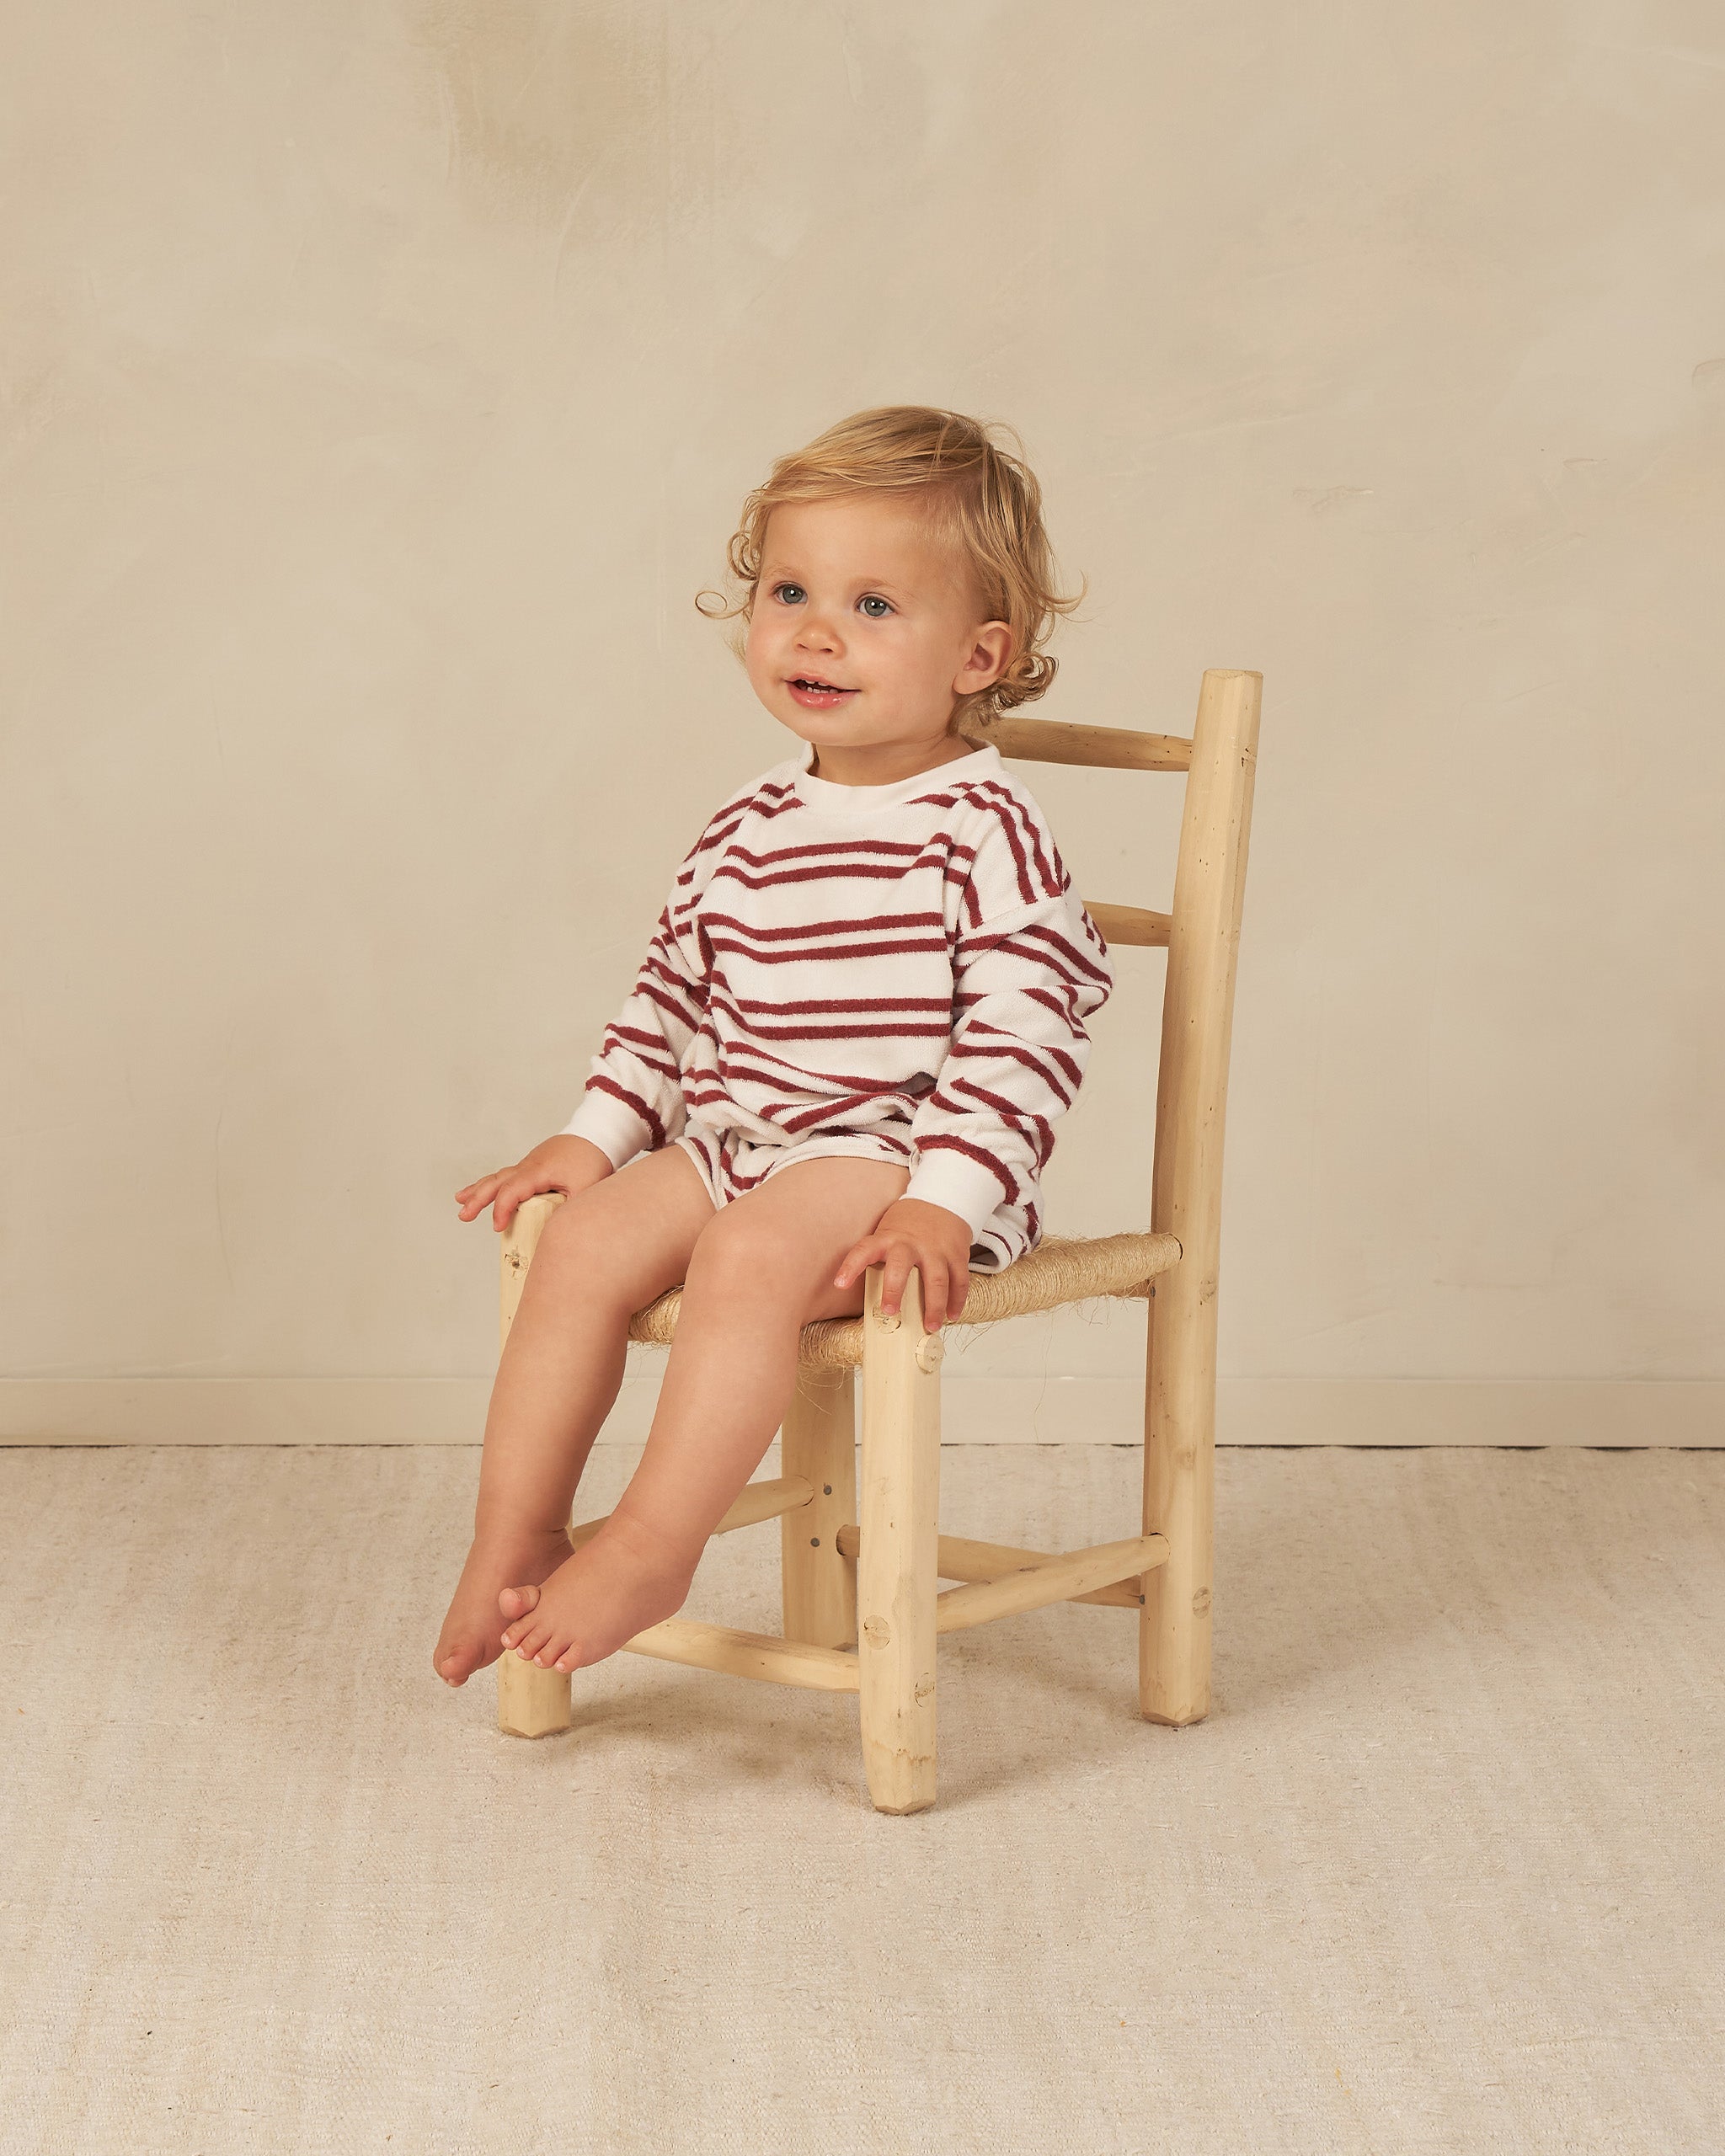 Sweatshirt || Red Stripe - Rylee + Cru | Kids Clothes | Trendy Baby Clothes | Modern Infant Outfits |